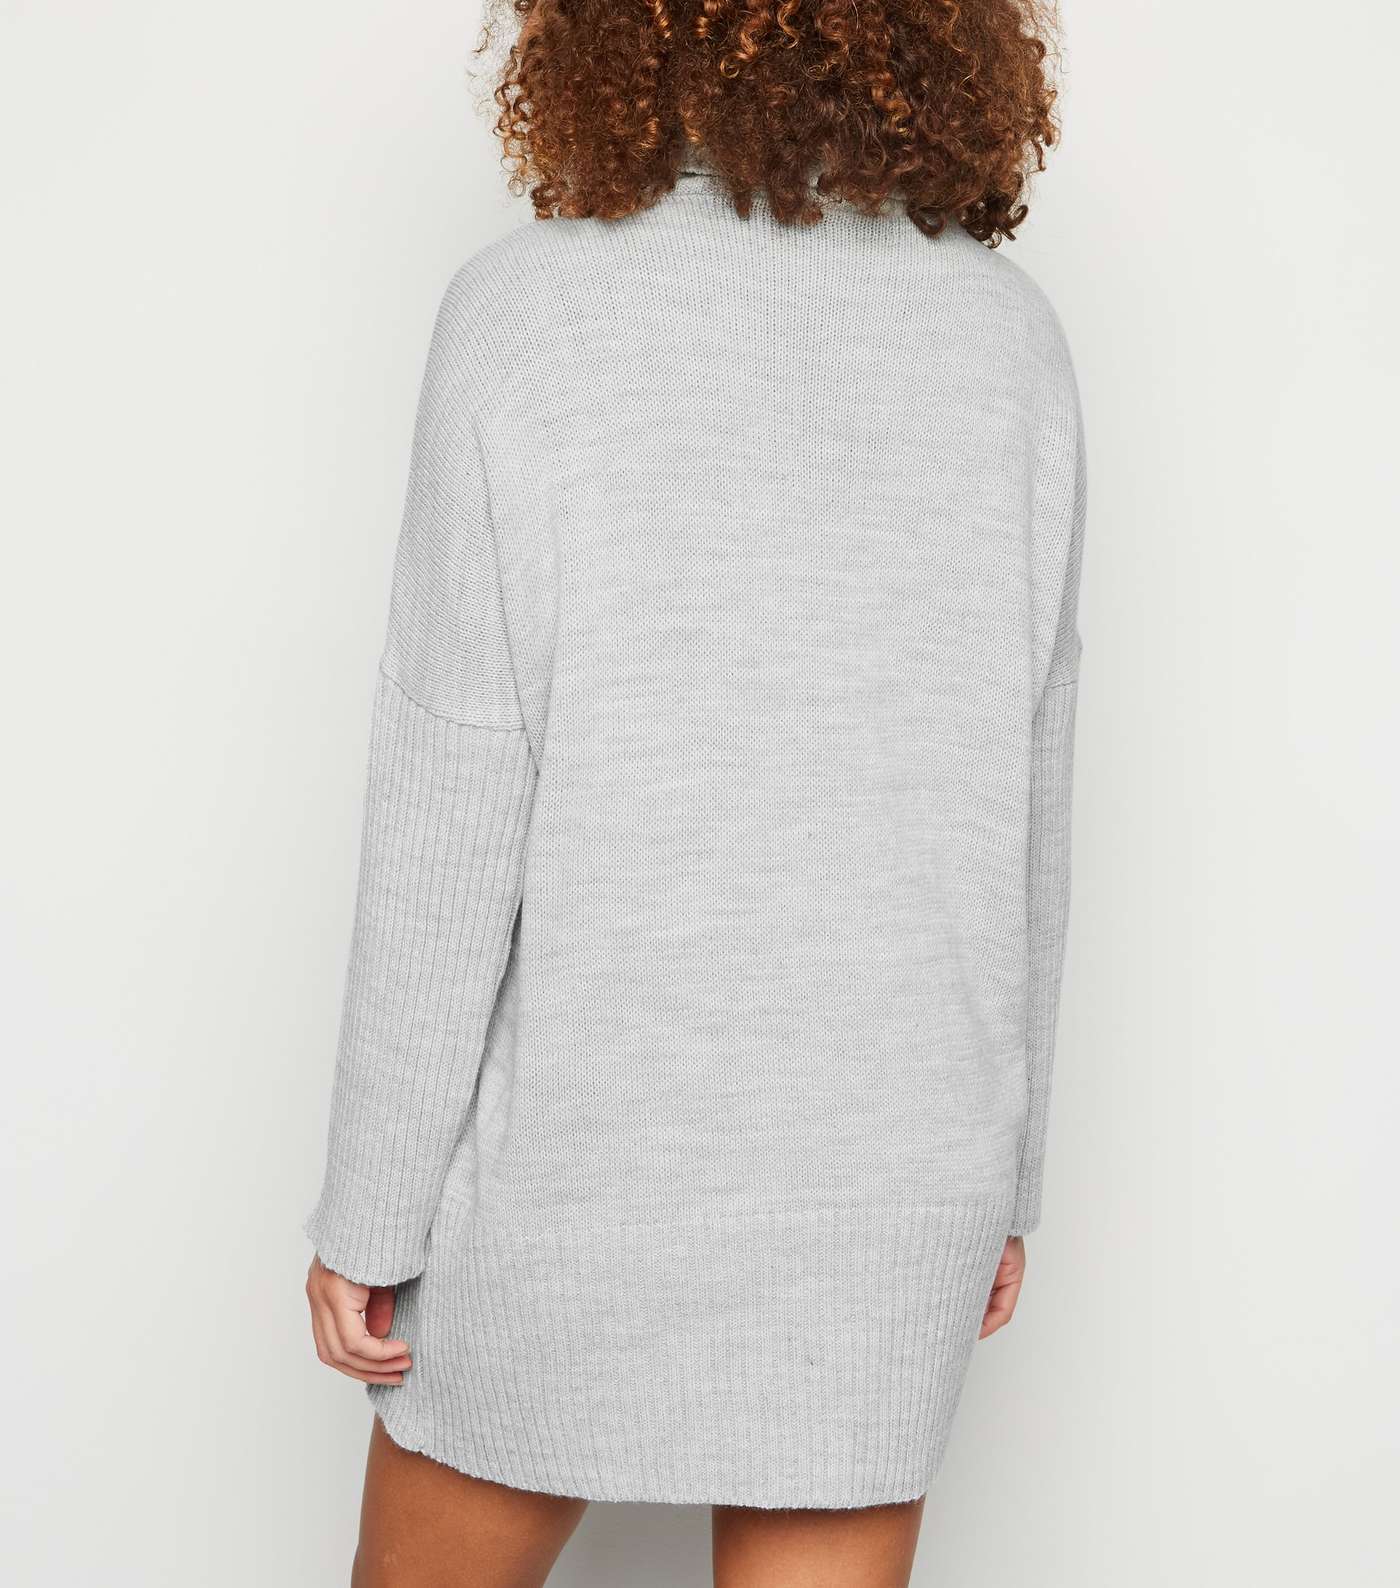 Cameo Rose Grey Cable Knit Jumper Dress Image 3